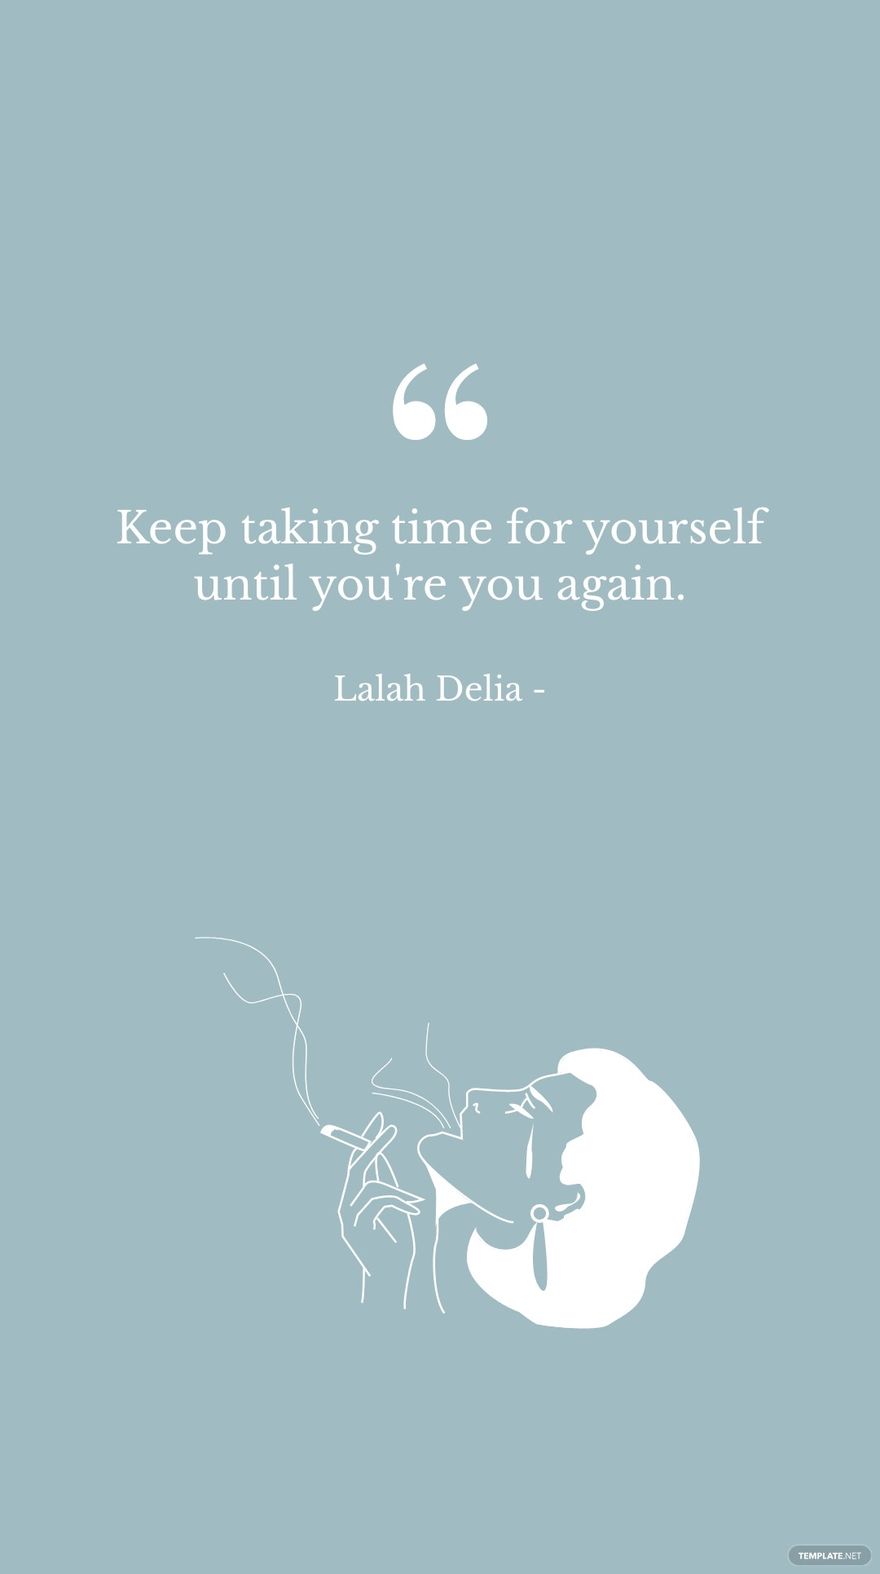 Free Lalah Delia - Keep taking time for yourself until you're you again.